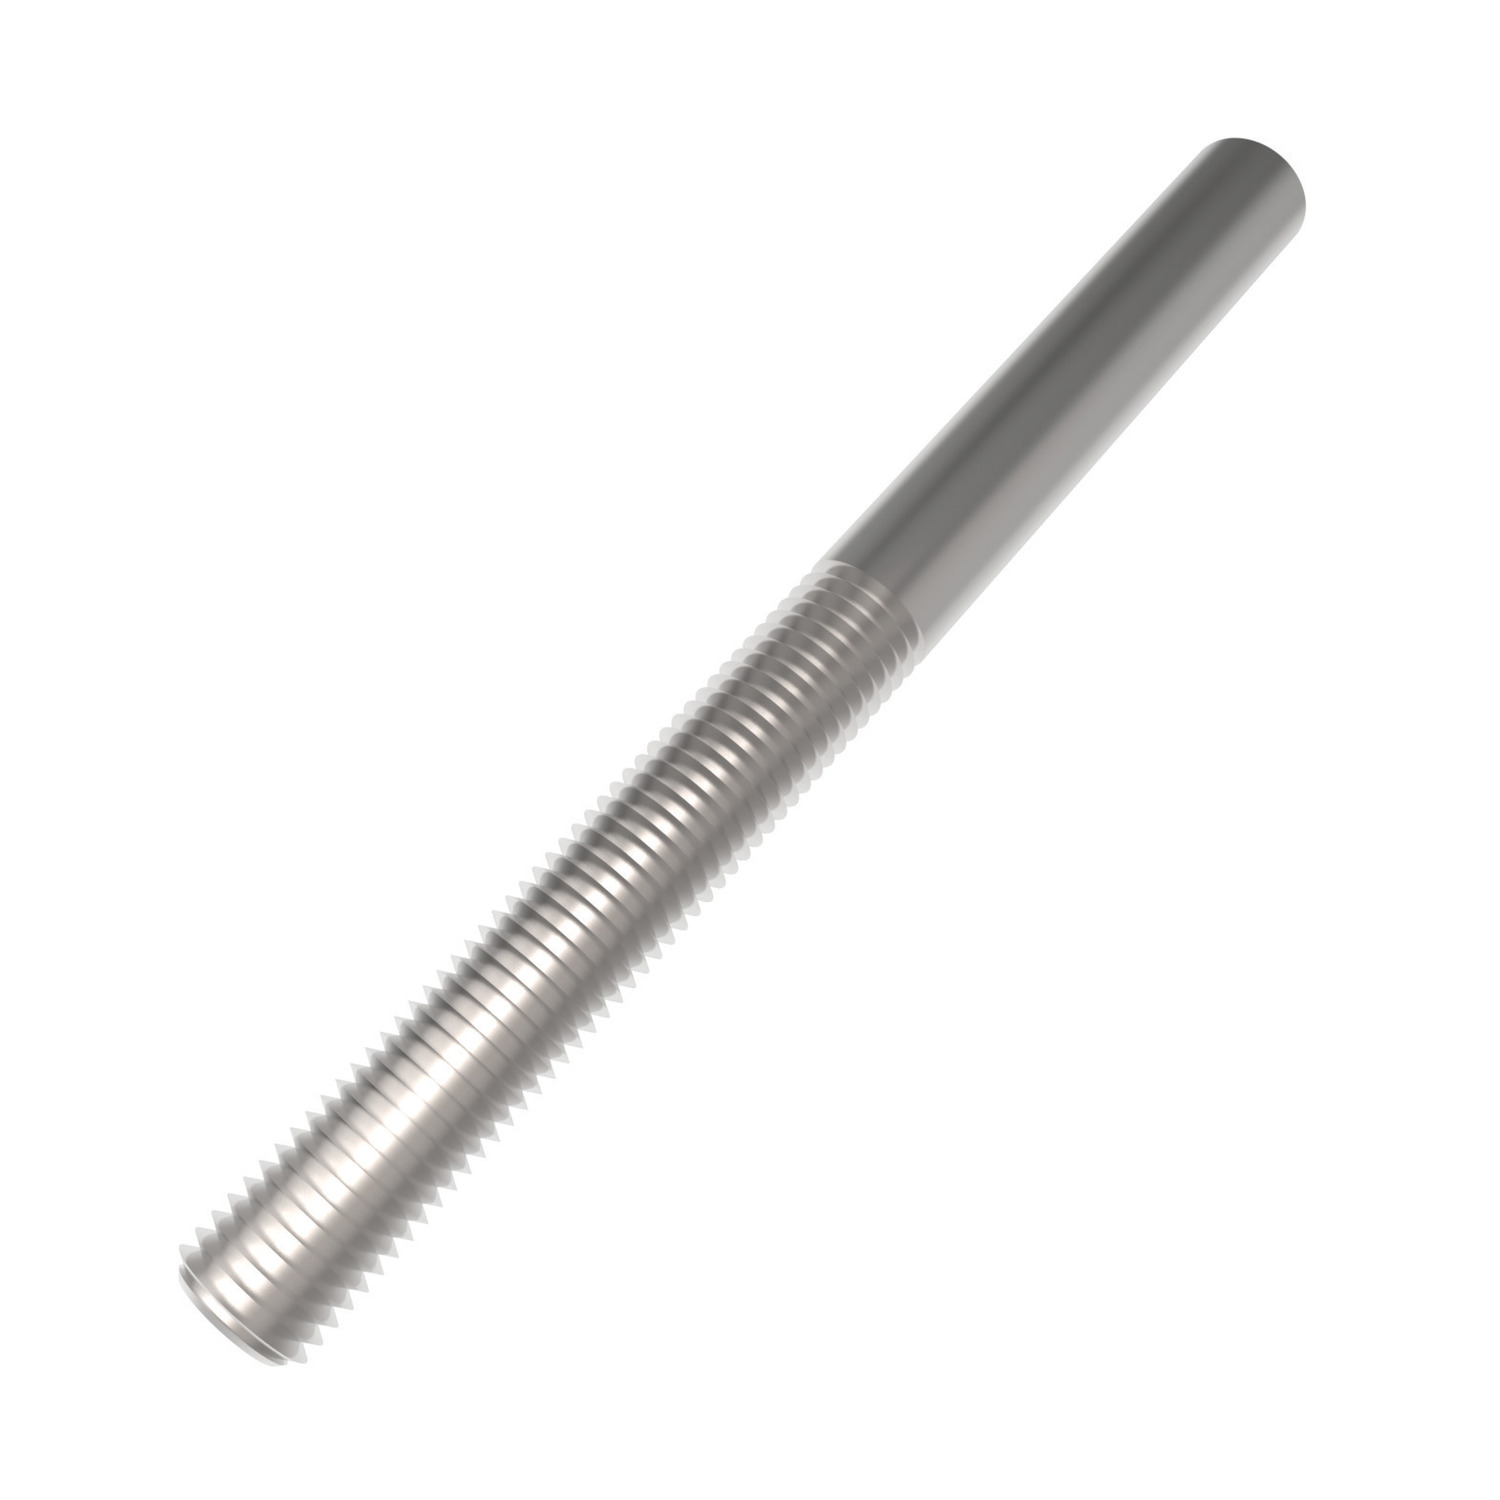 R3866.R020-ZP Welding Studs steel RH M20 Not to be used for lifting unless SWL marked.